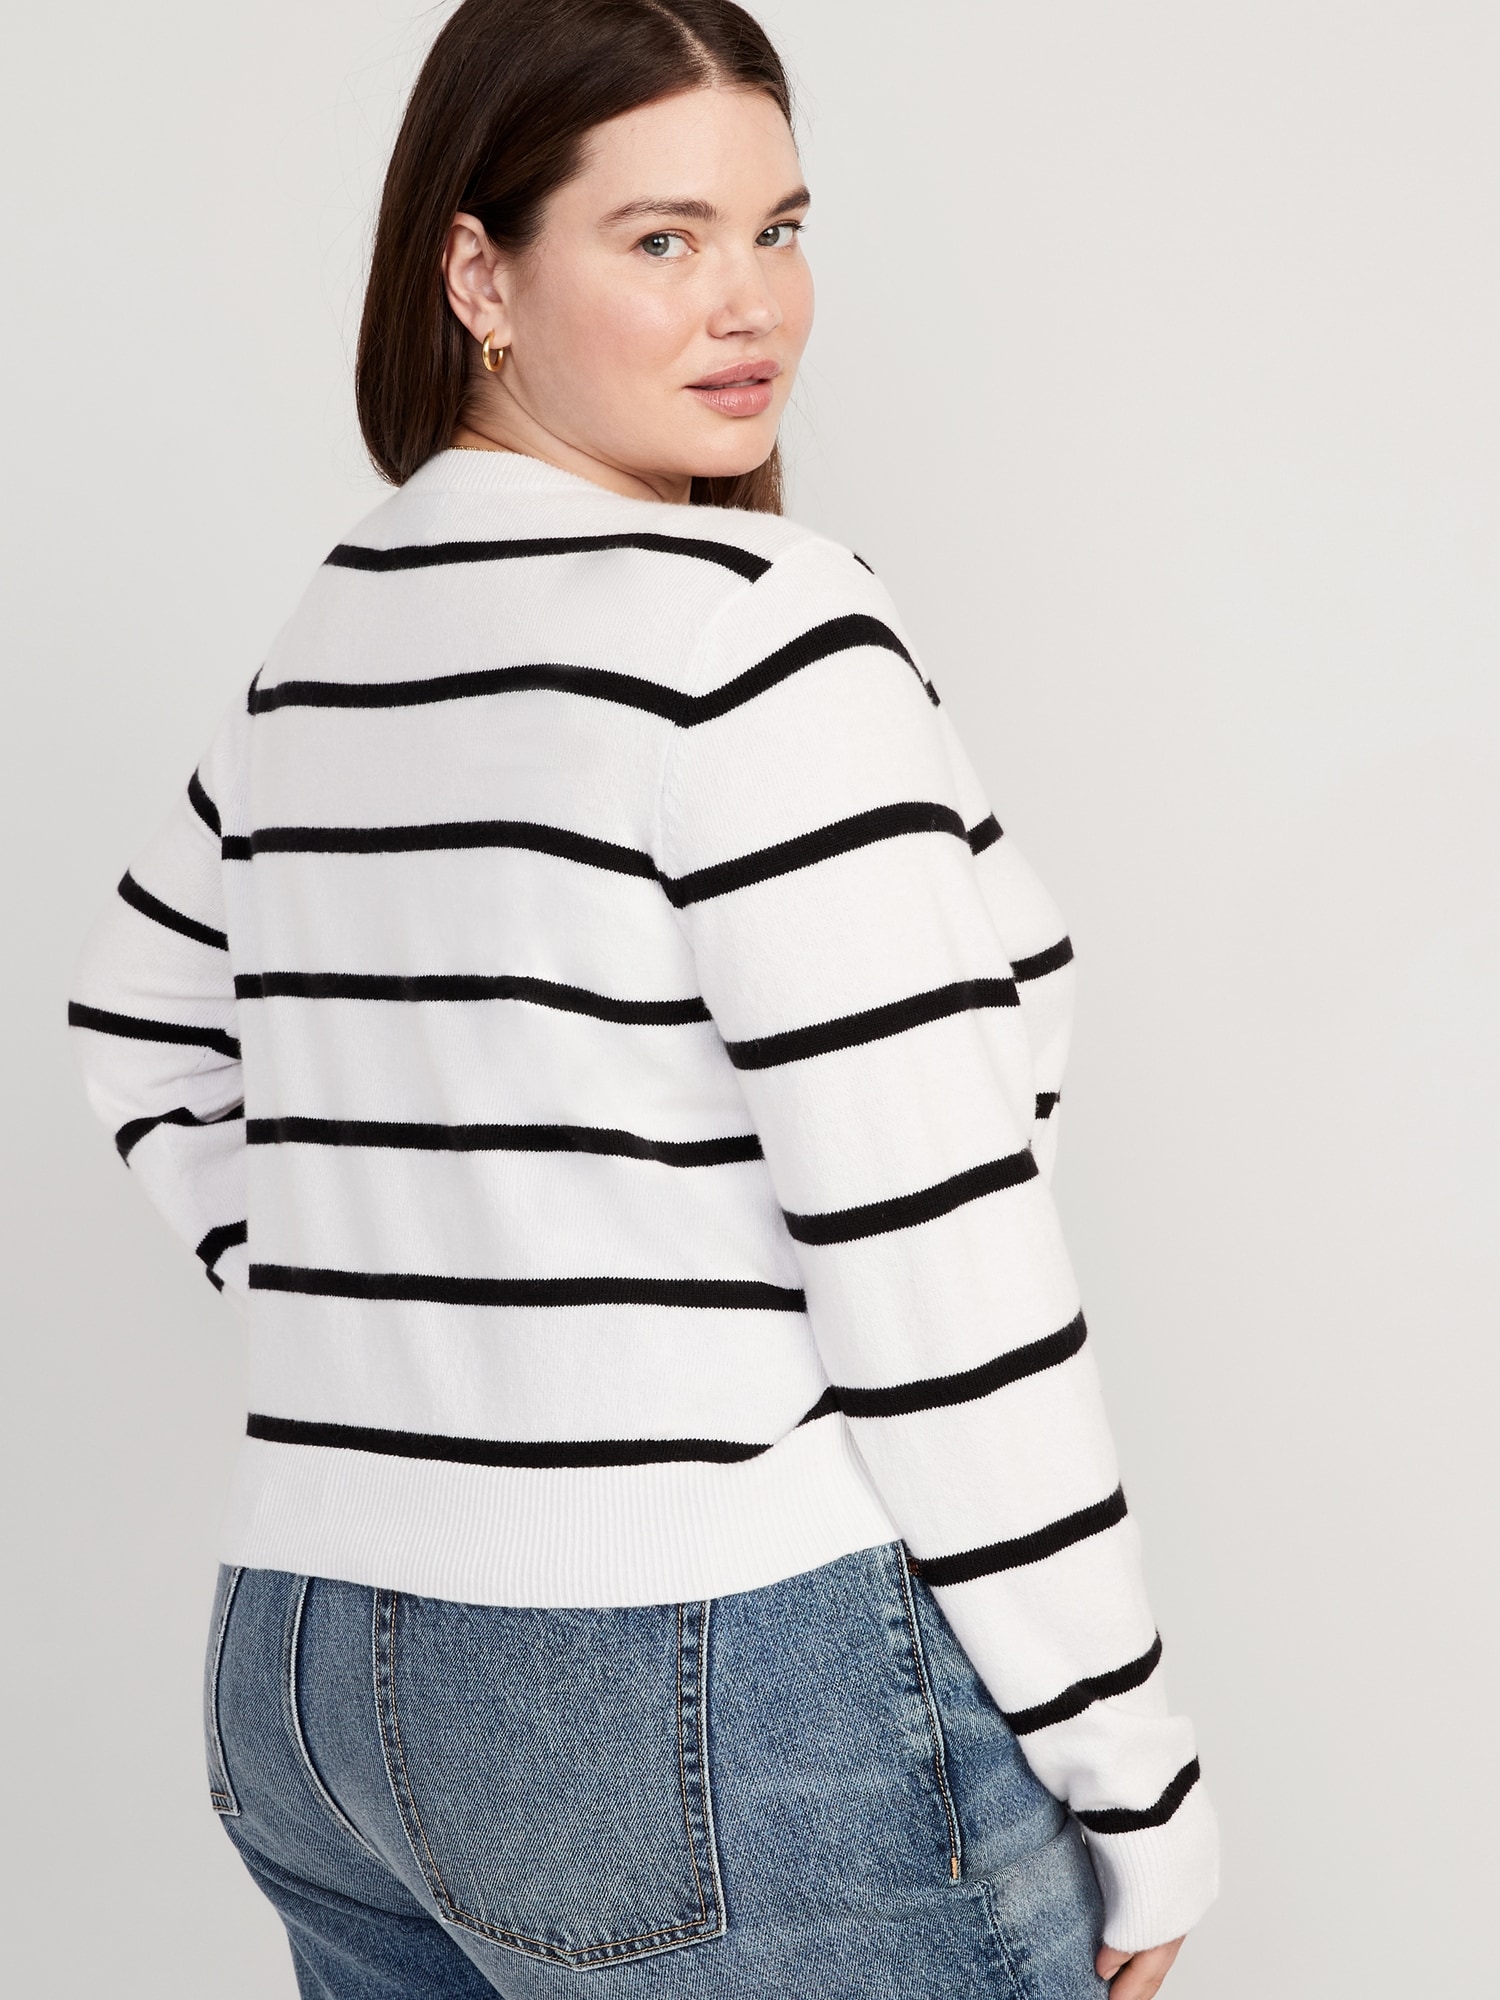 Womens Black And White Striped Sweater